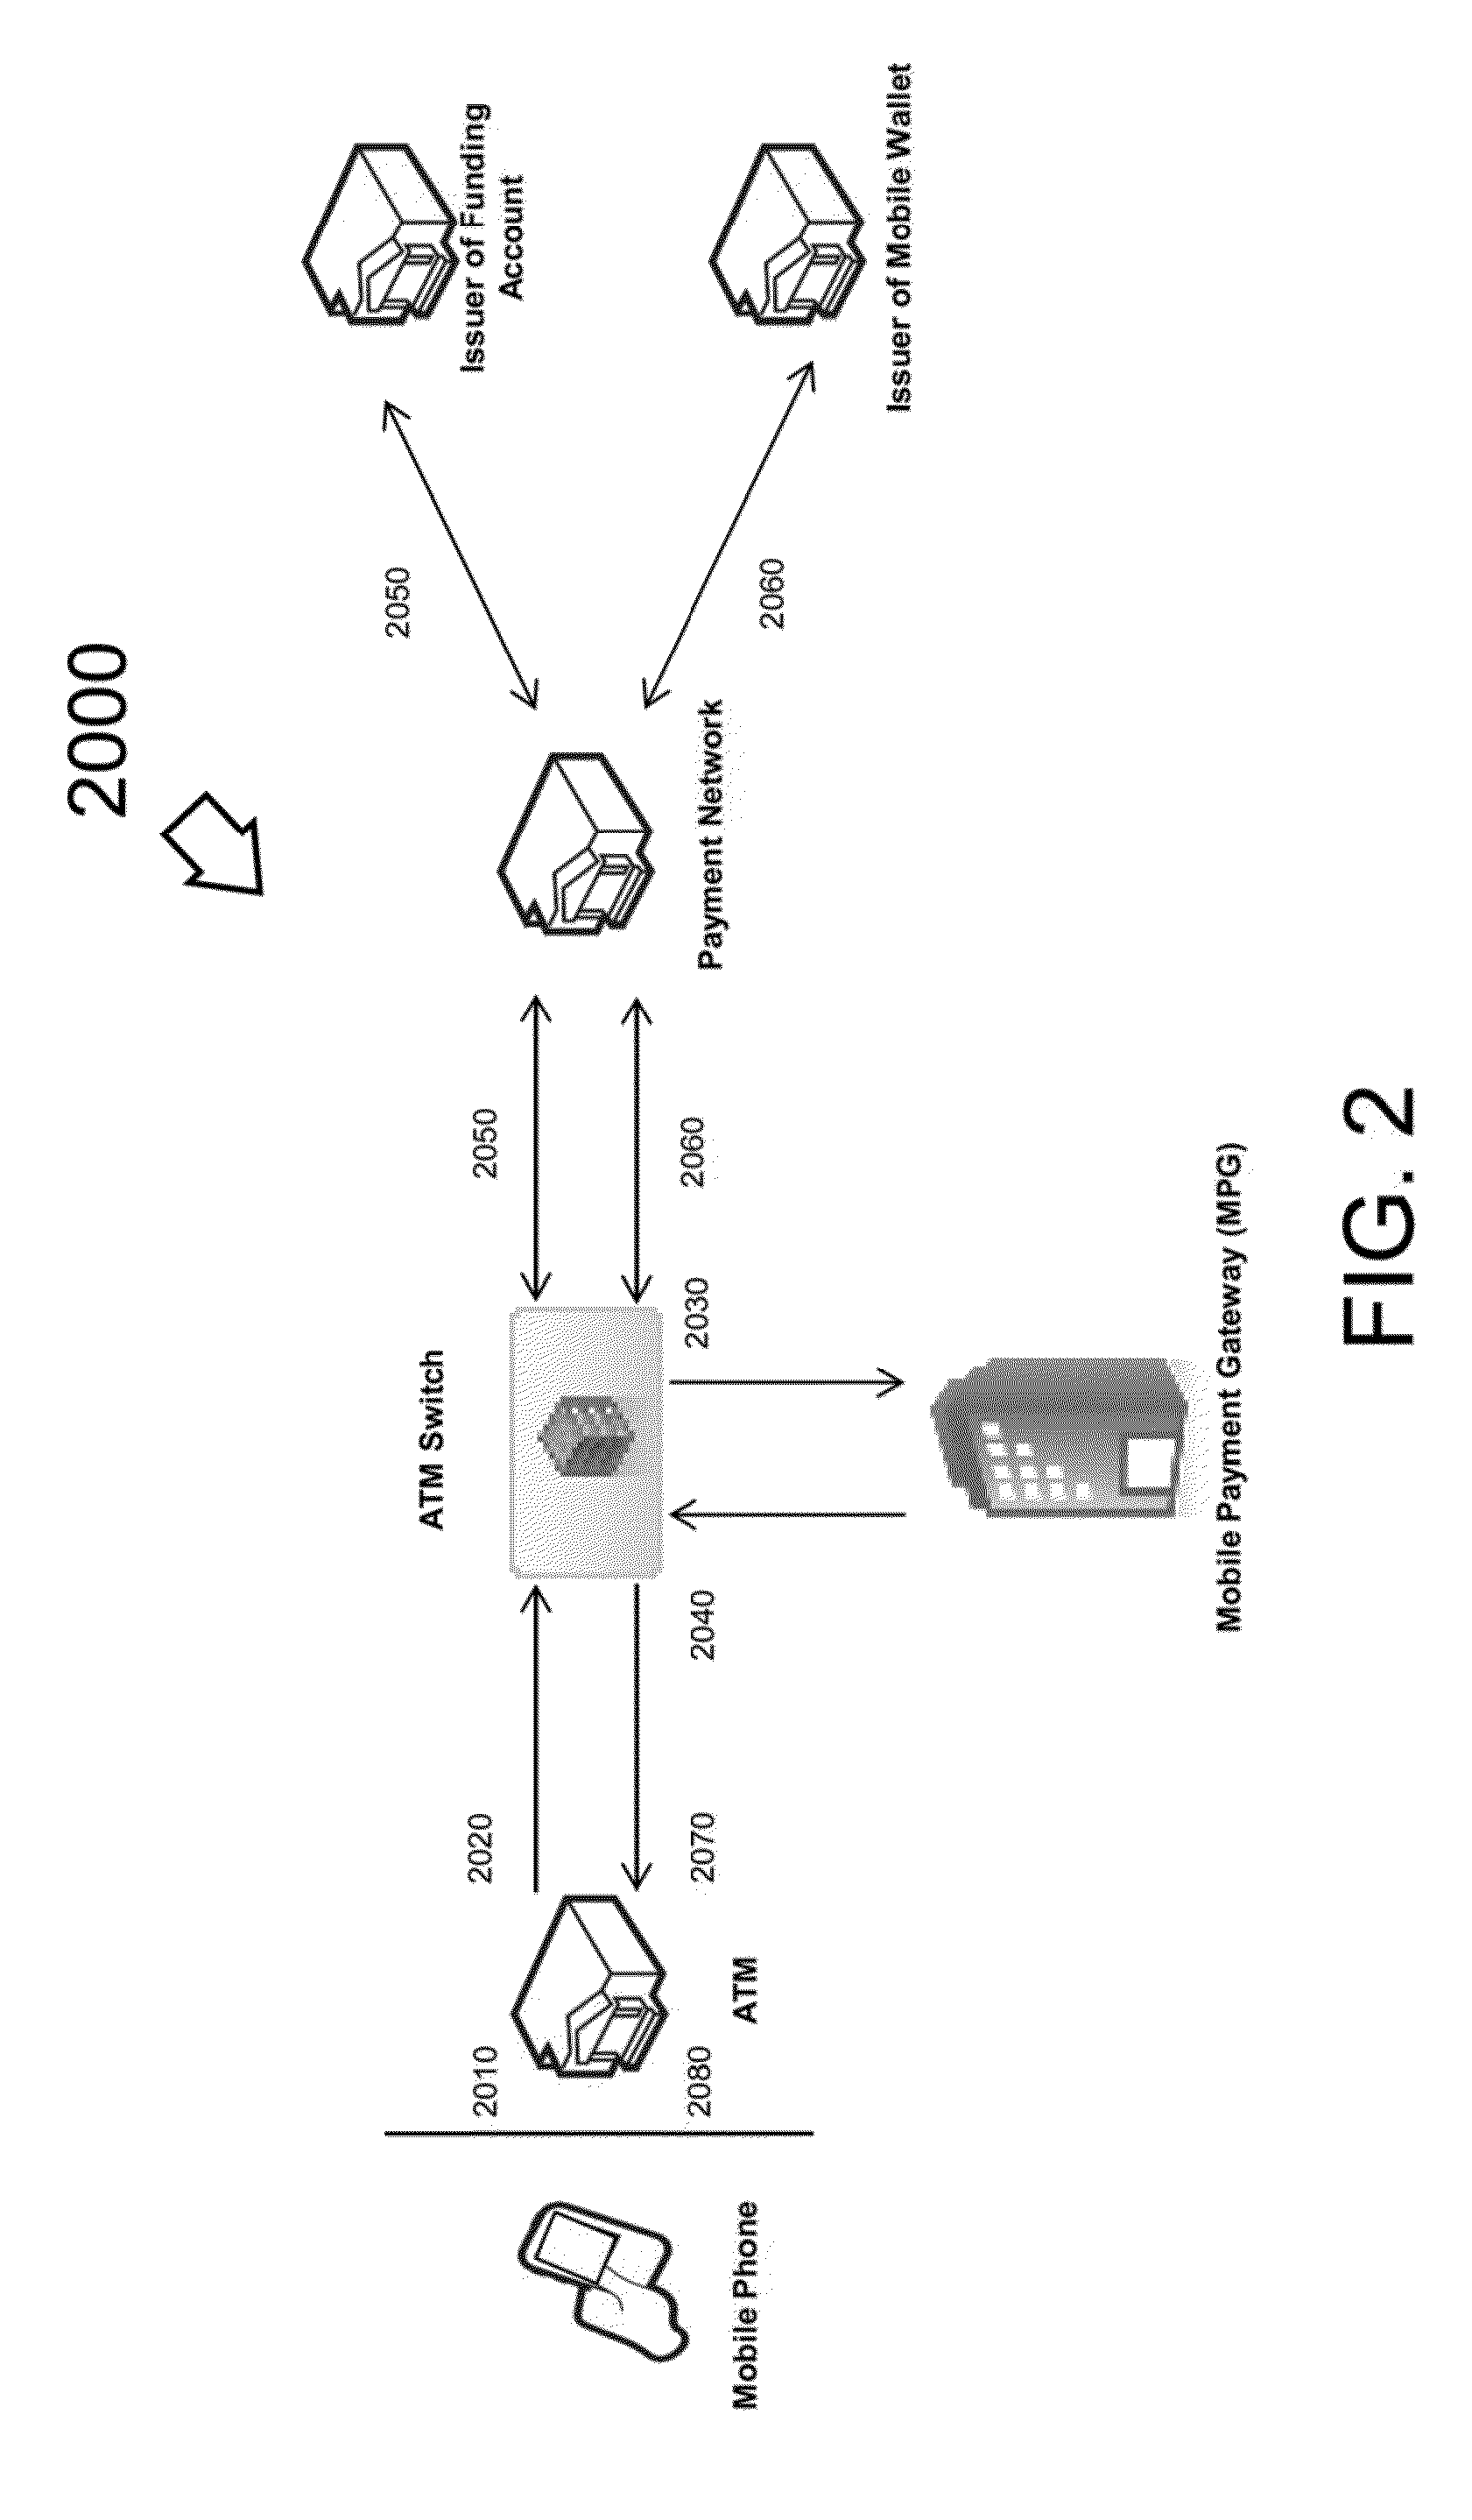 System and Method of Electronic Authentication at a Computer Initiated Via Mobile